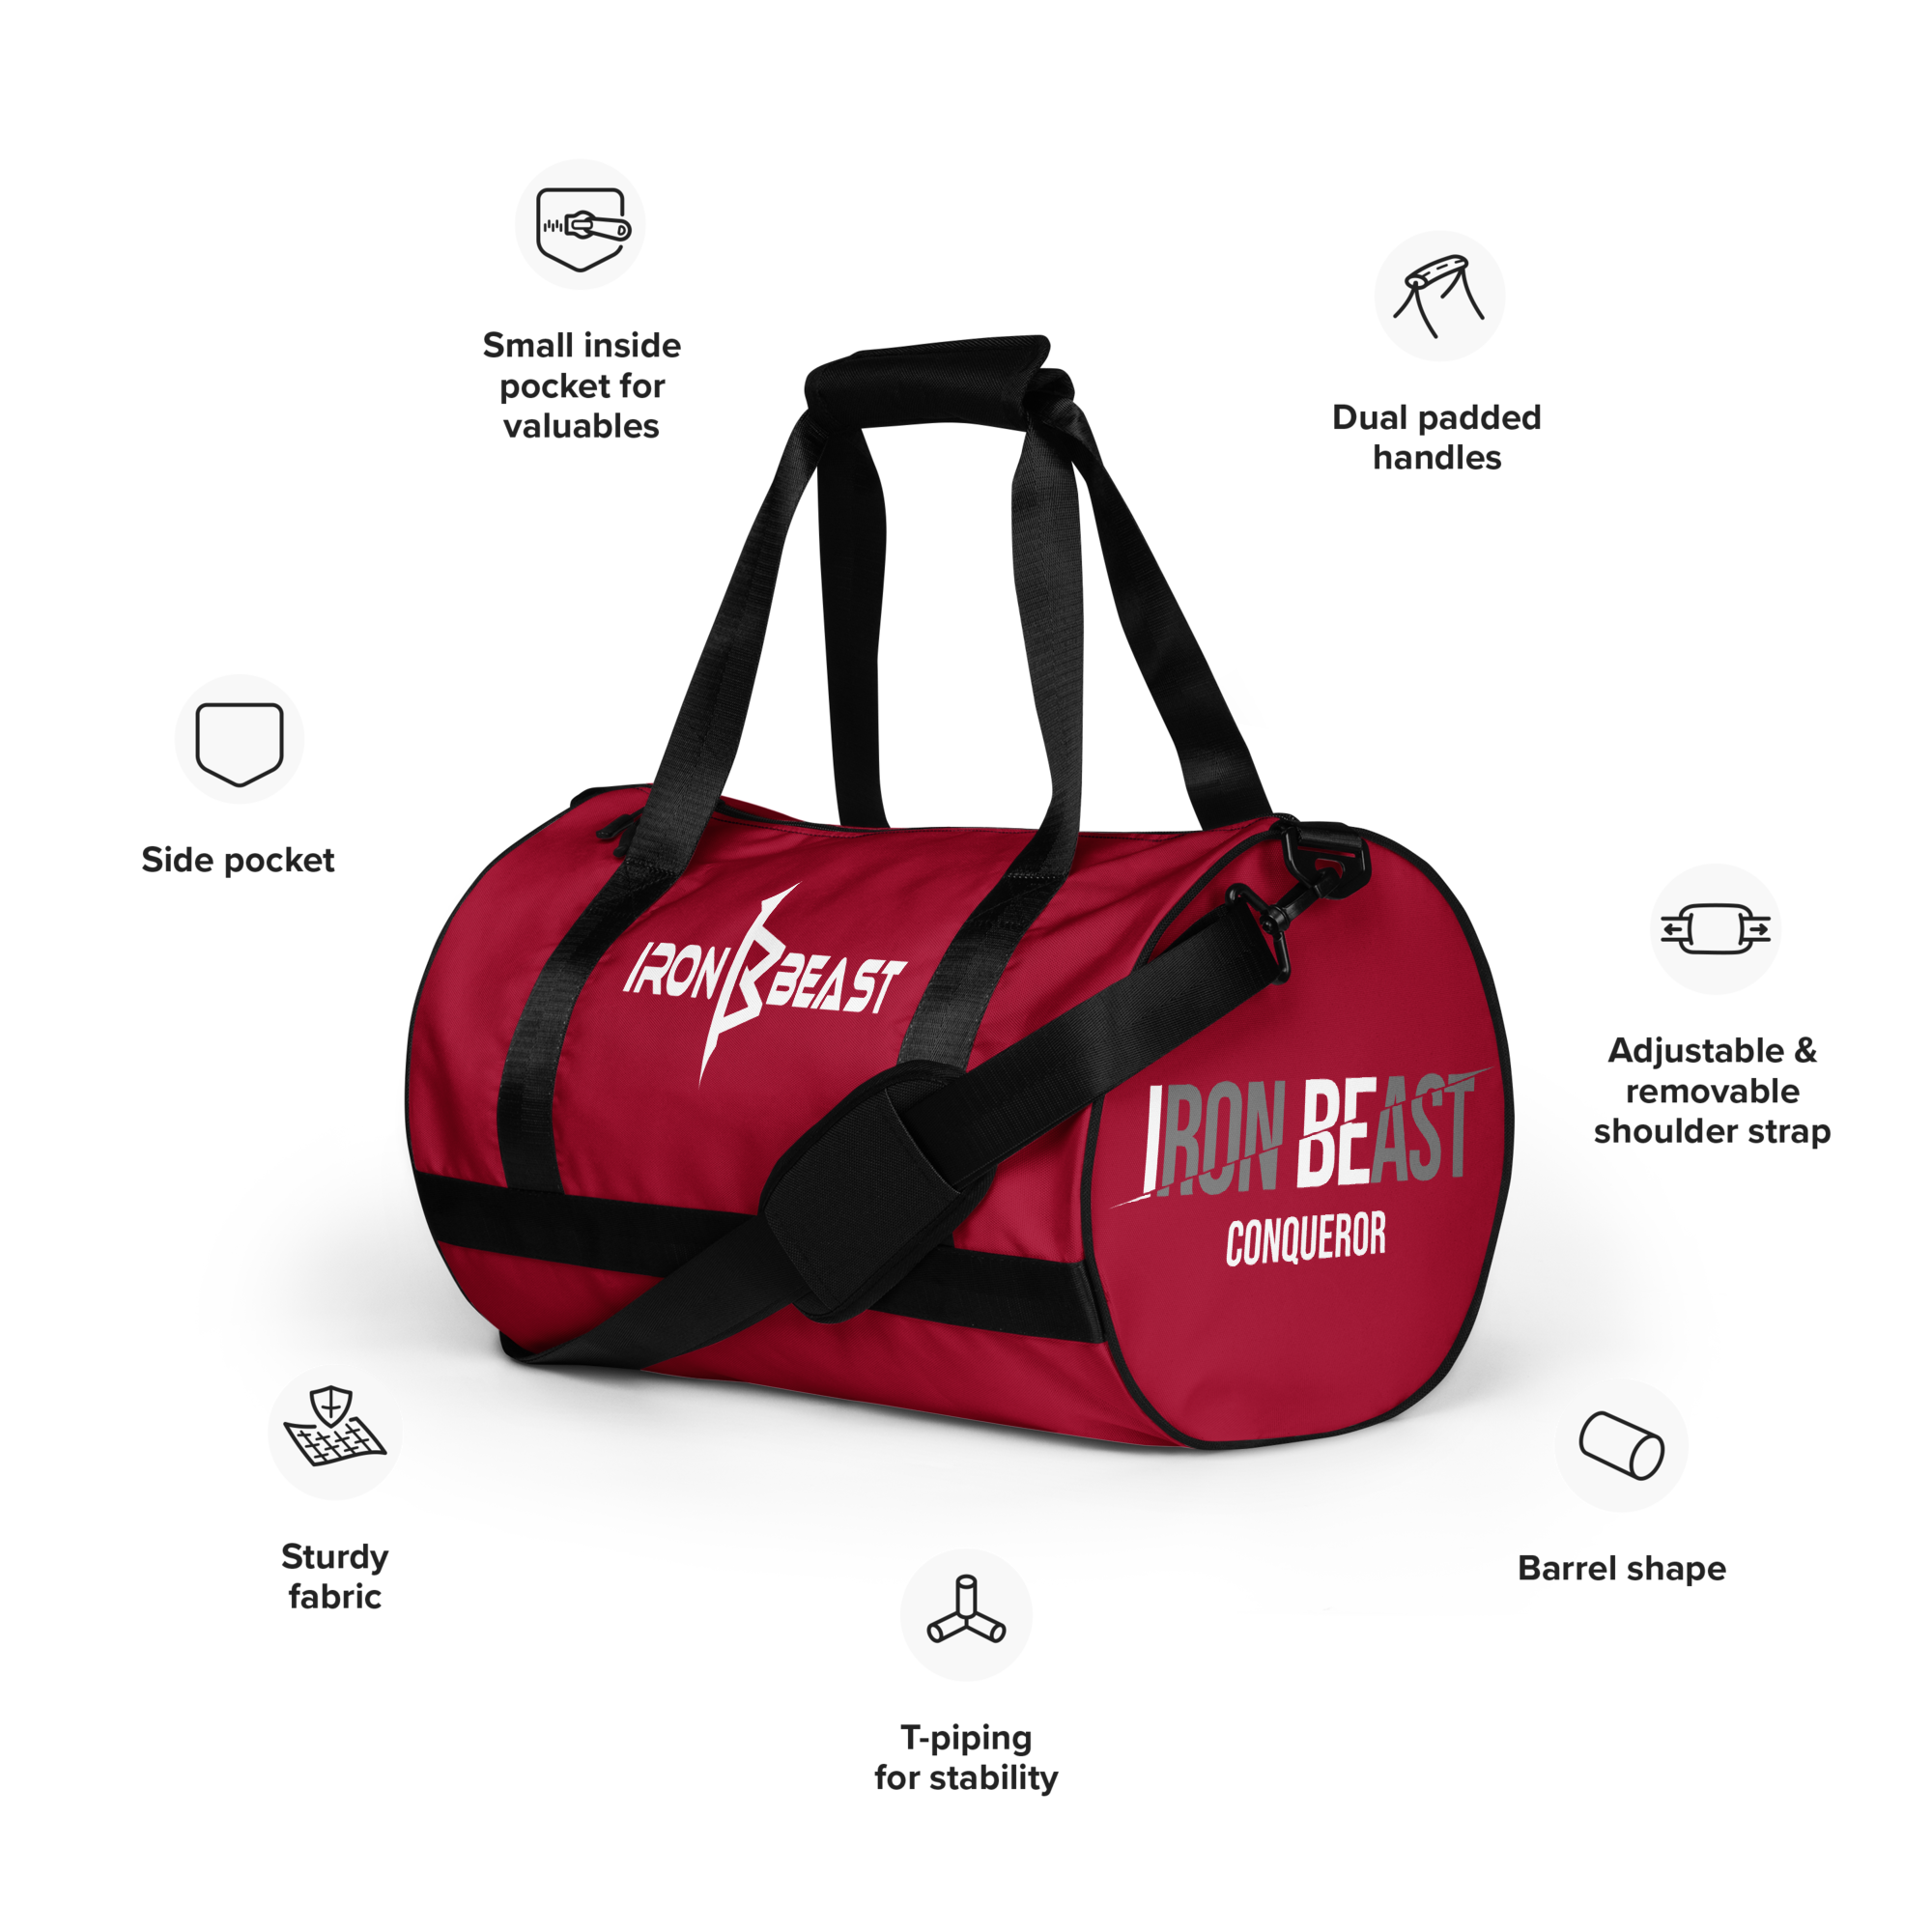 Fitness Bags